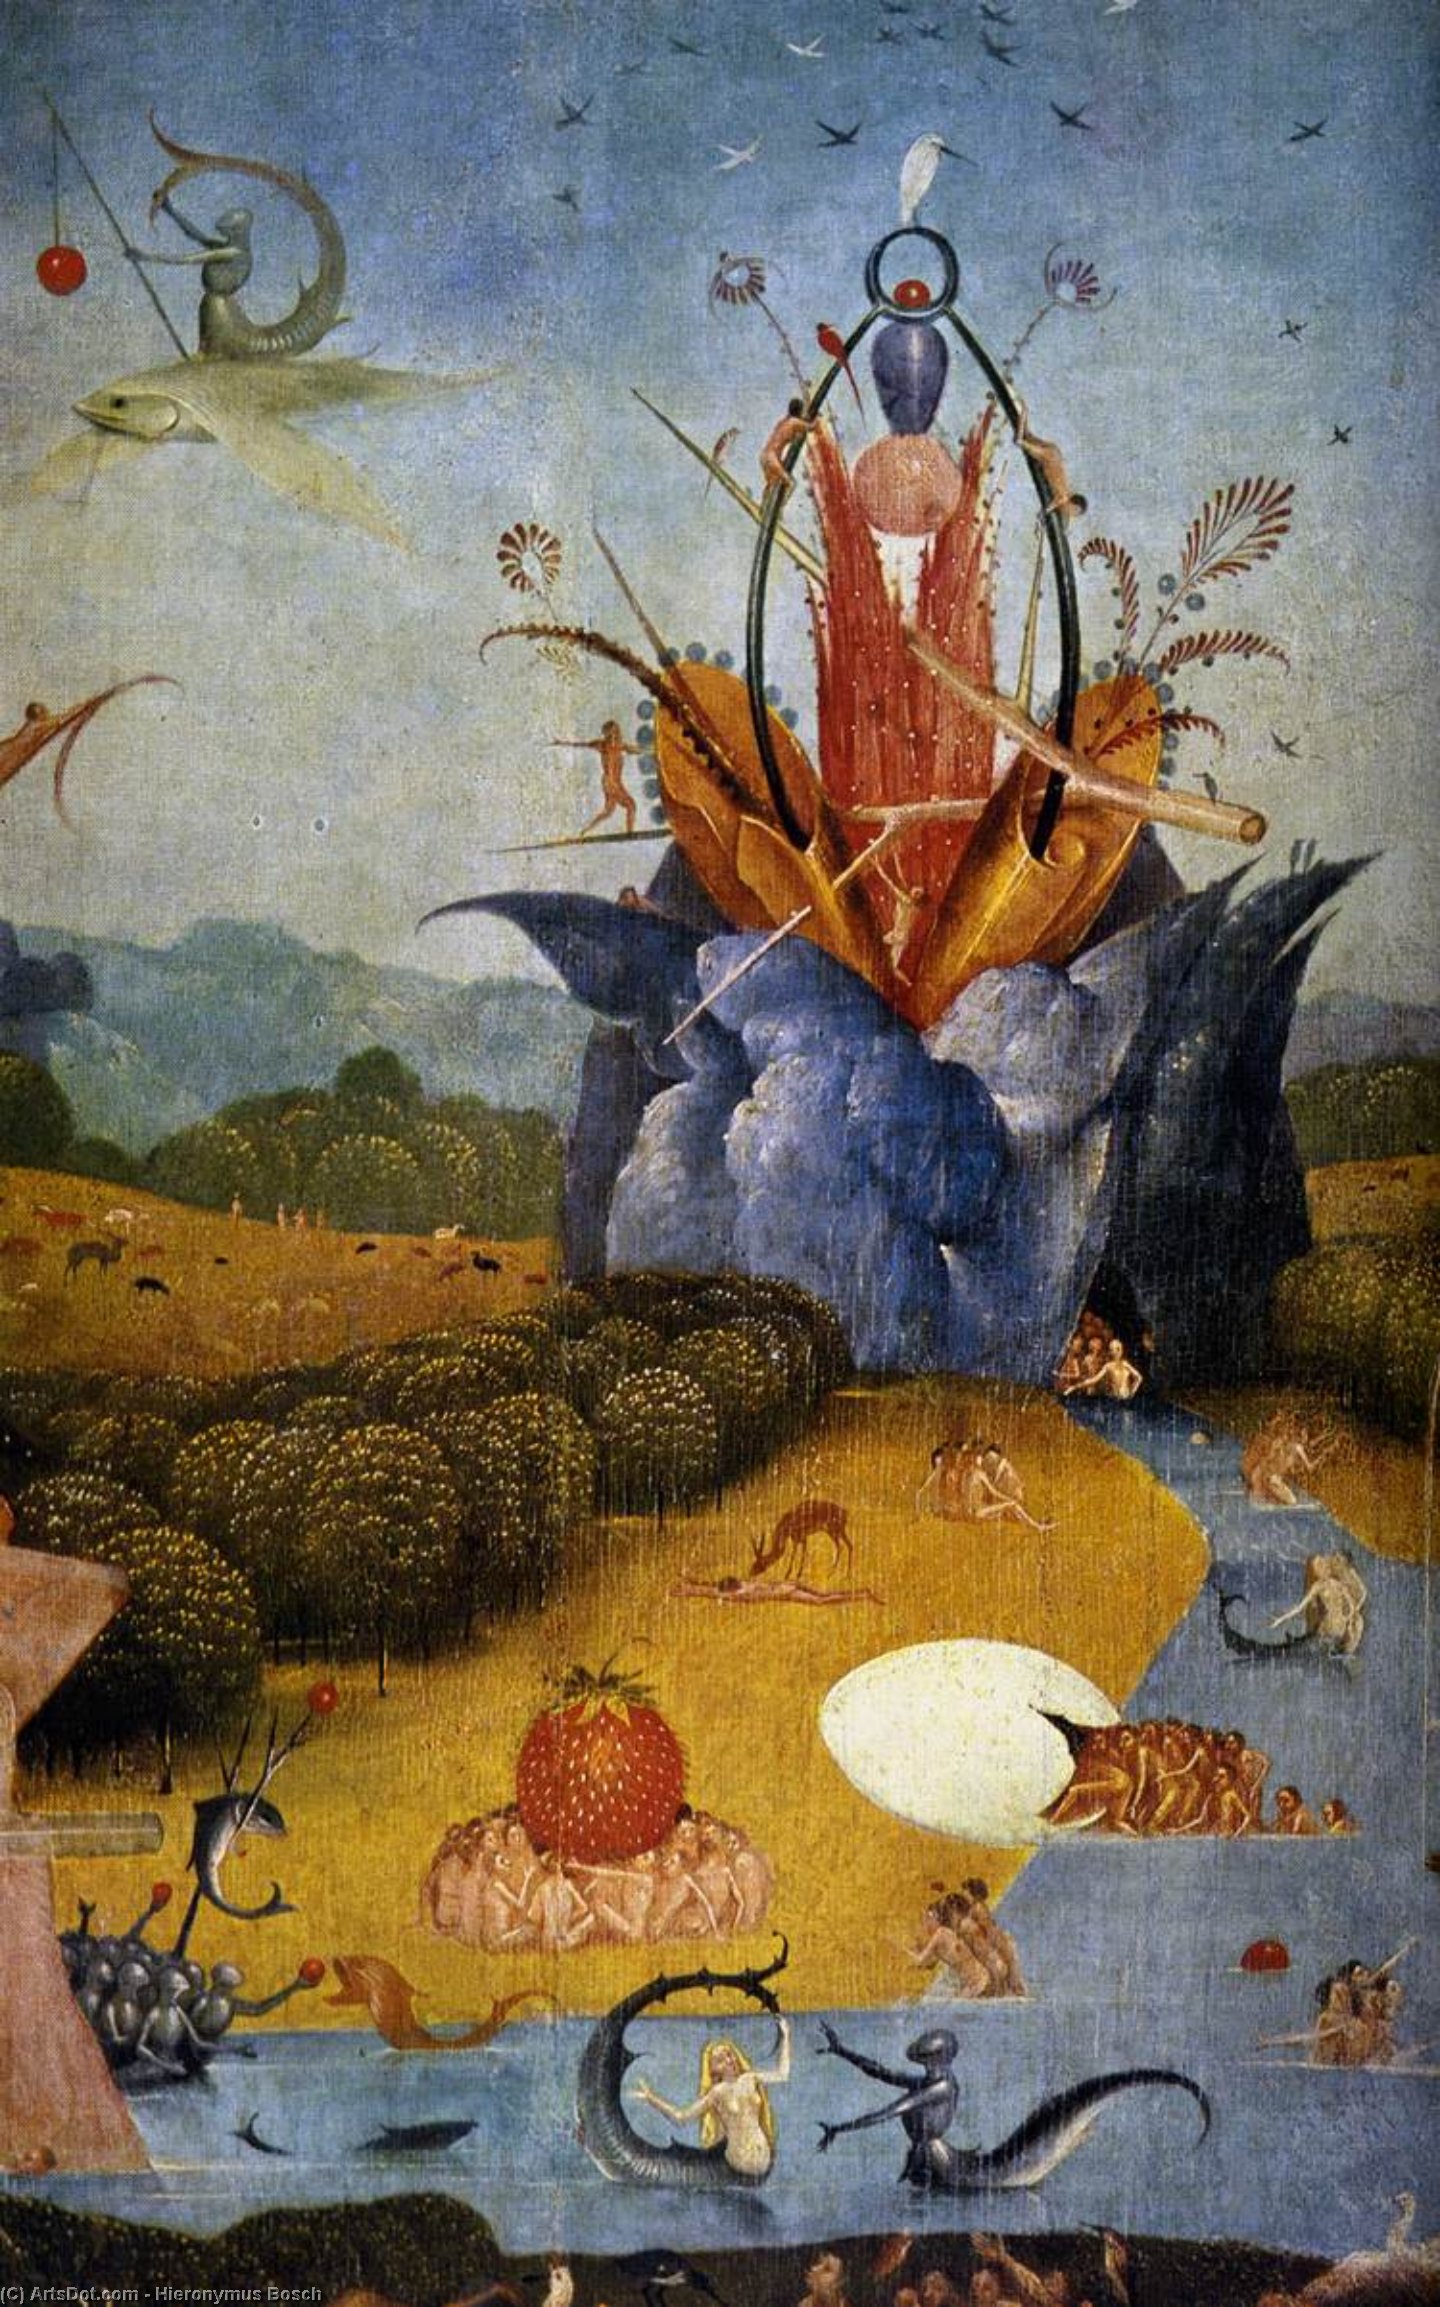 WikiOO.org - Encyclopedia of Fine Arts - Malba, Artwork Hieronymus Bosch - Triptych of Garden of Earthly Delights (detail) (23)